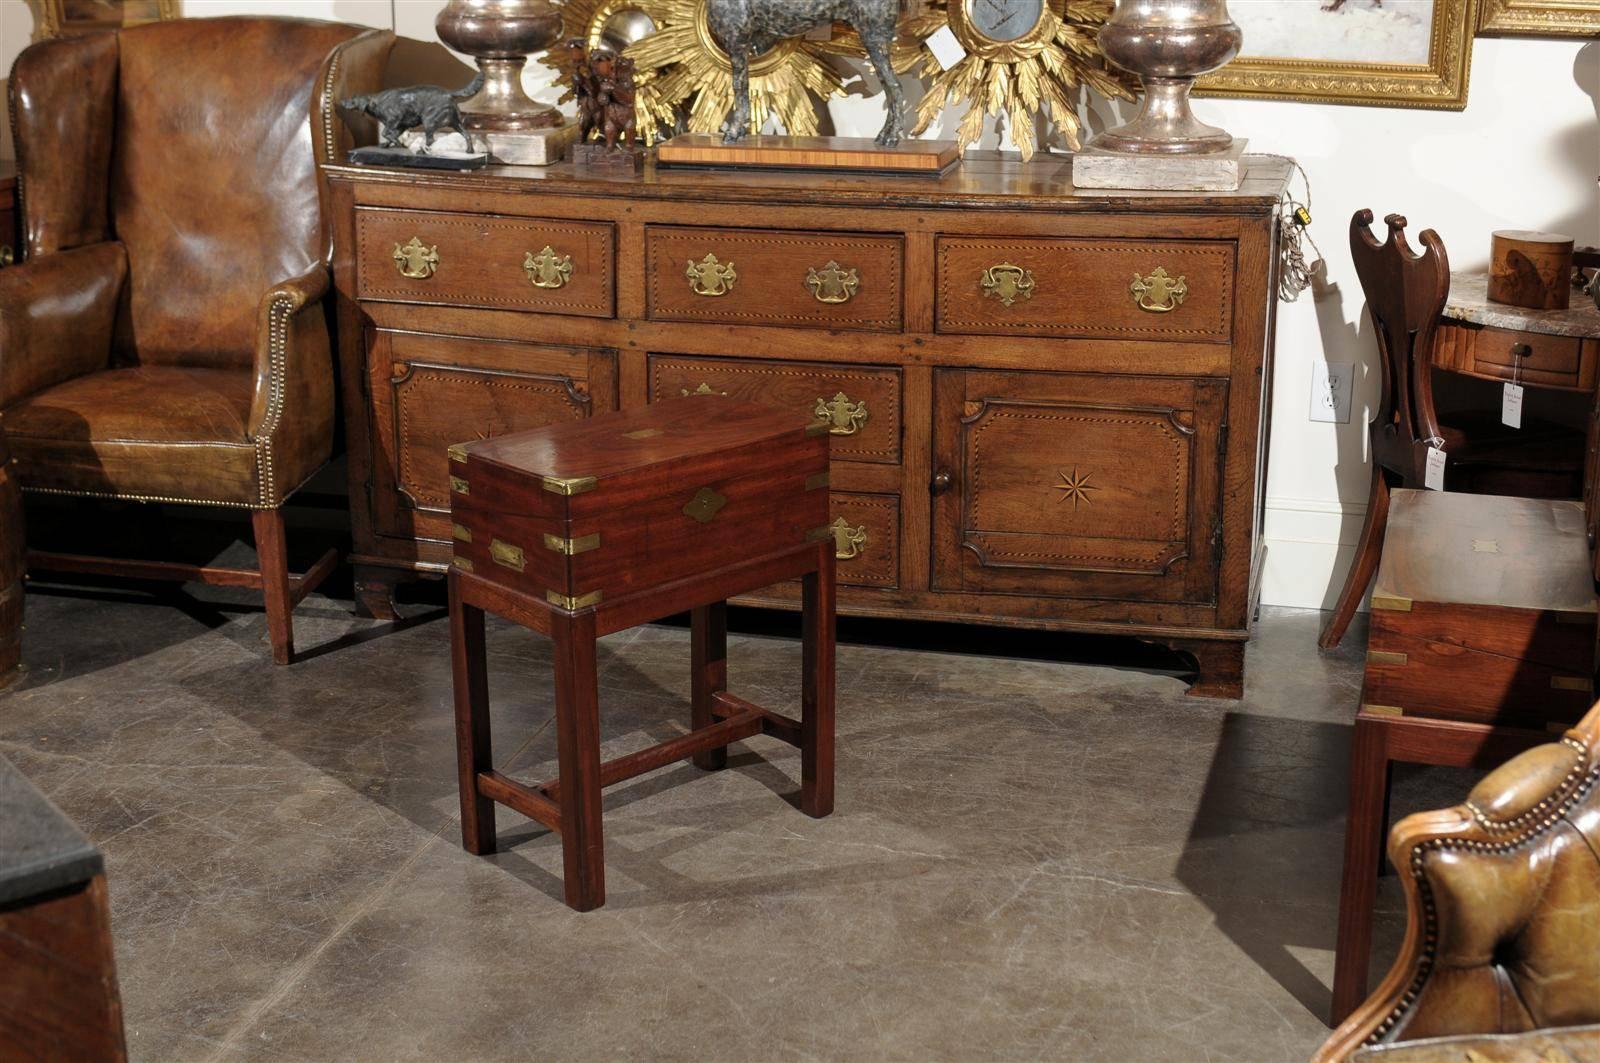 Campaign English Mahogany Writing Box or Lap Desk on Stand with Brass Handles and Storage